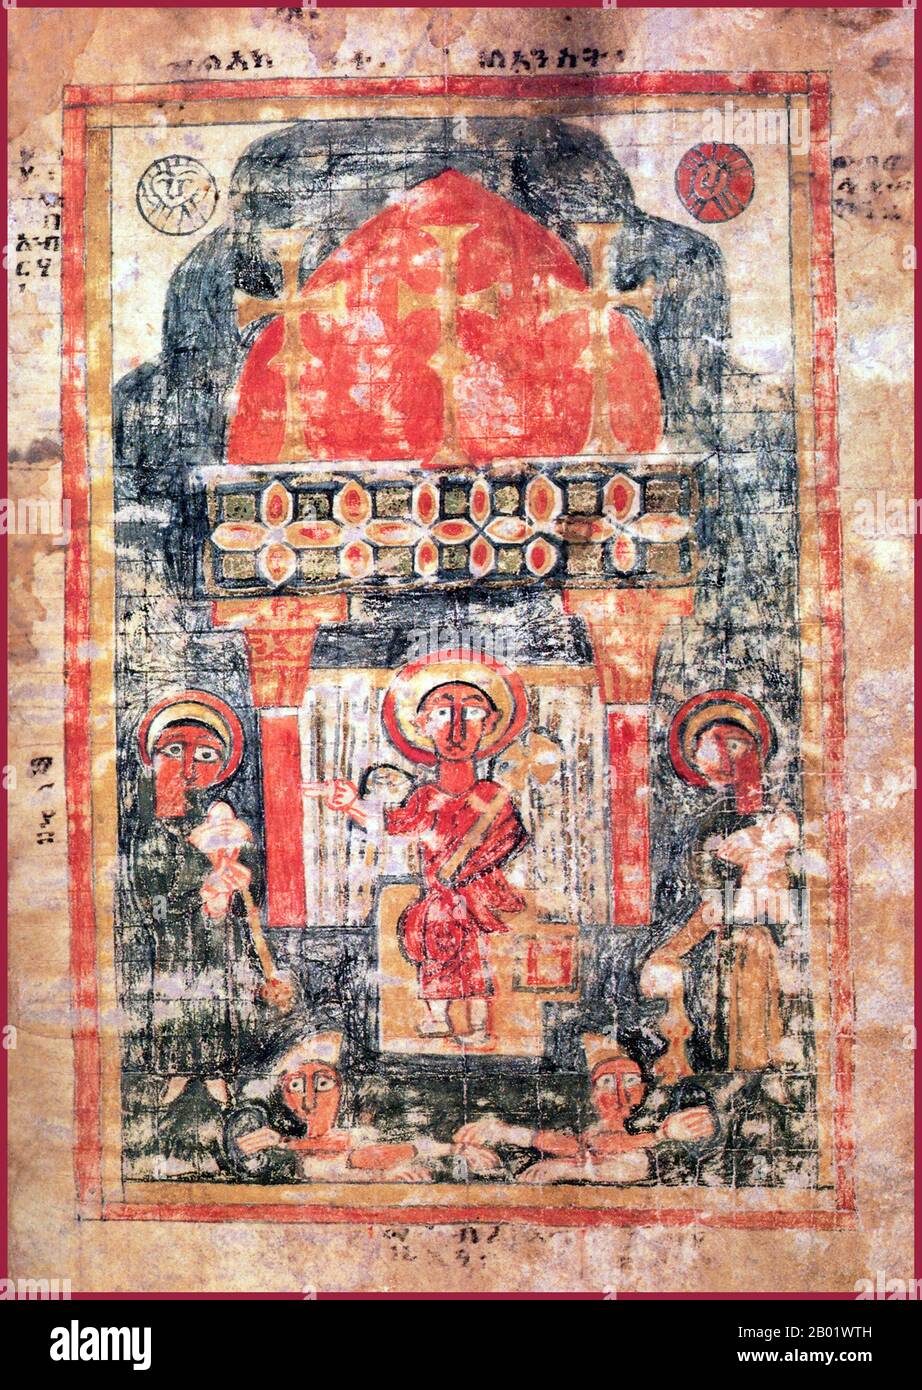 Ethiopia: The Ascension as represented in an Ethiopian Gospel, 14th century.  Christianity in Ethiopia dates to the 1st century CE, and this long tradition makes Ethiopia unique amongst sub-Saharan African countries. Christianity in this country is divided into several groups. The largest and oldest is the Ethiopian Orthodox Tewahedo Church which is an Oriental Orthodox church in Ethiopia that was part of the Coptic Orthodox Church until 1959, when it was granted its own Patriarch by Coptic Orthodox Pope of Alexandria and Patriarch of All Africa Cyril VI. Stock Photo